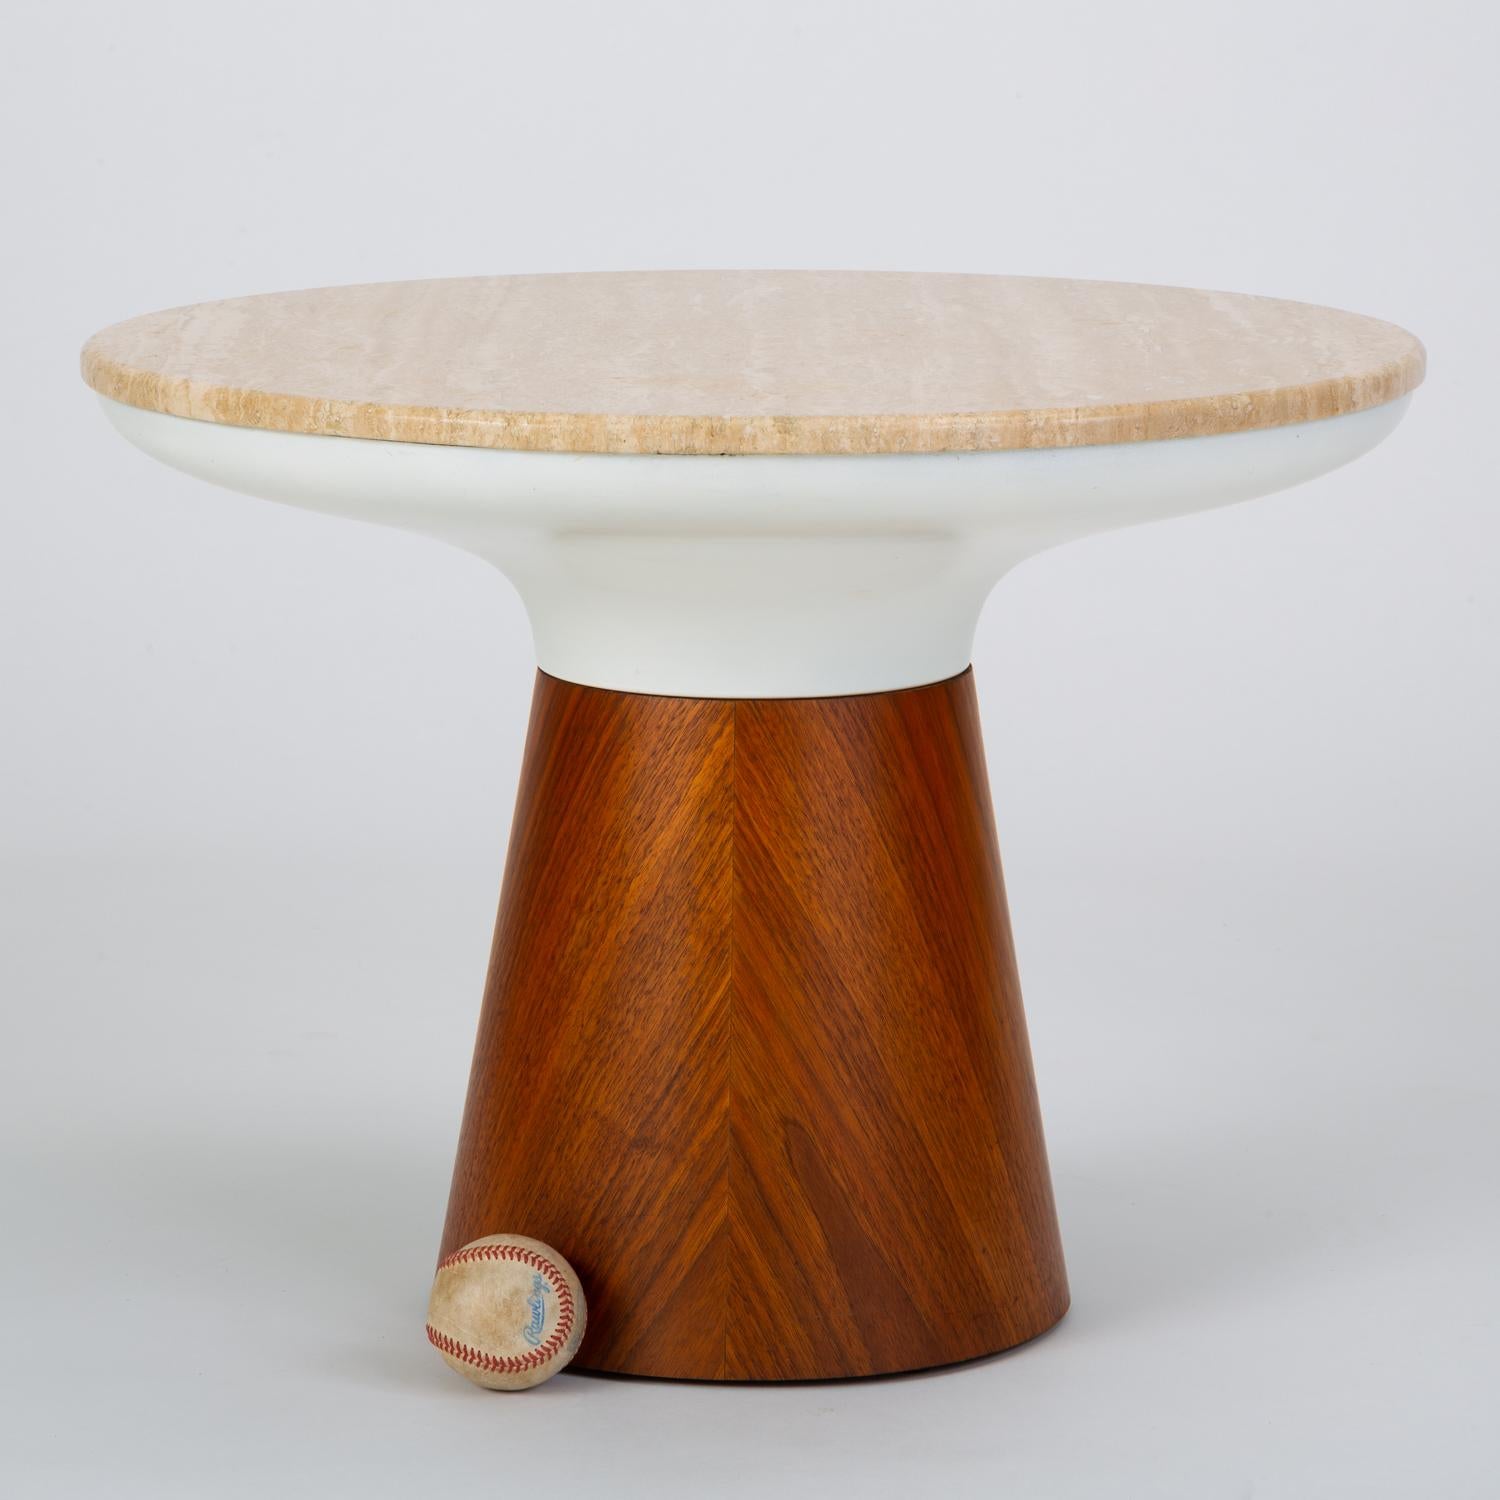 A round pedestal side table designed in 1965 by Frank Rohloff and produced in California by Brown Saltman. The color-blocked pieces has a travertine surface that sits flush with an angled frame of enameled steel. This segment fits seamlessly with